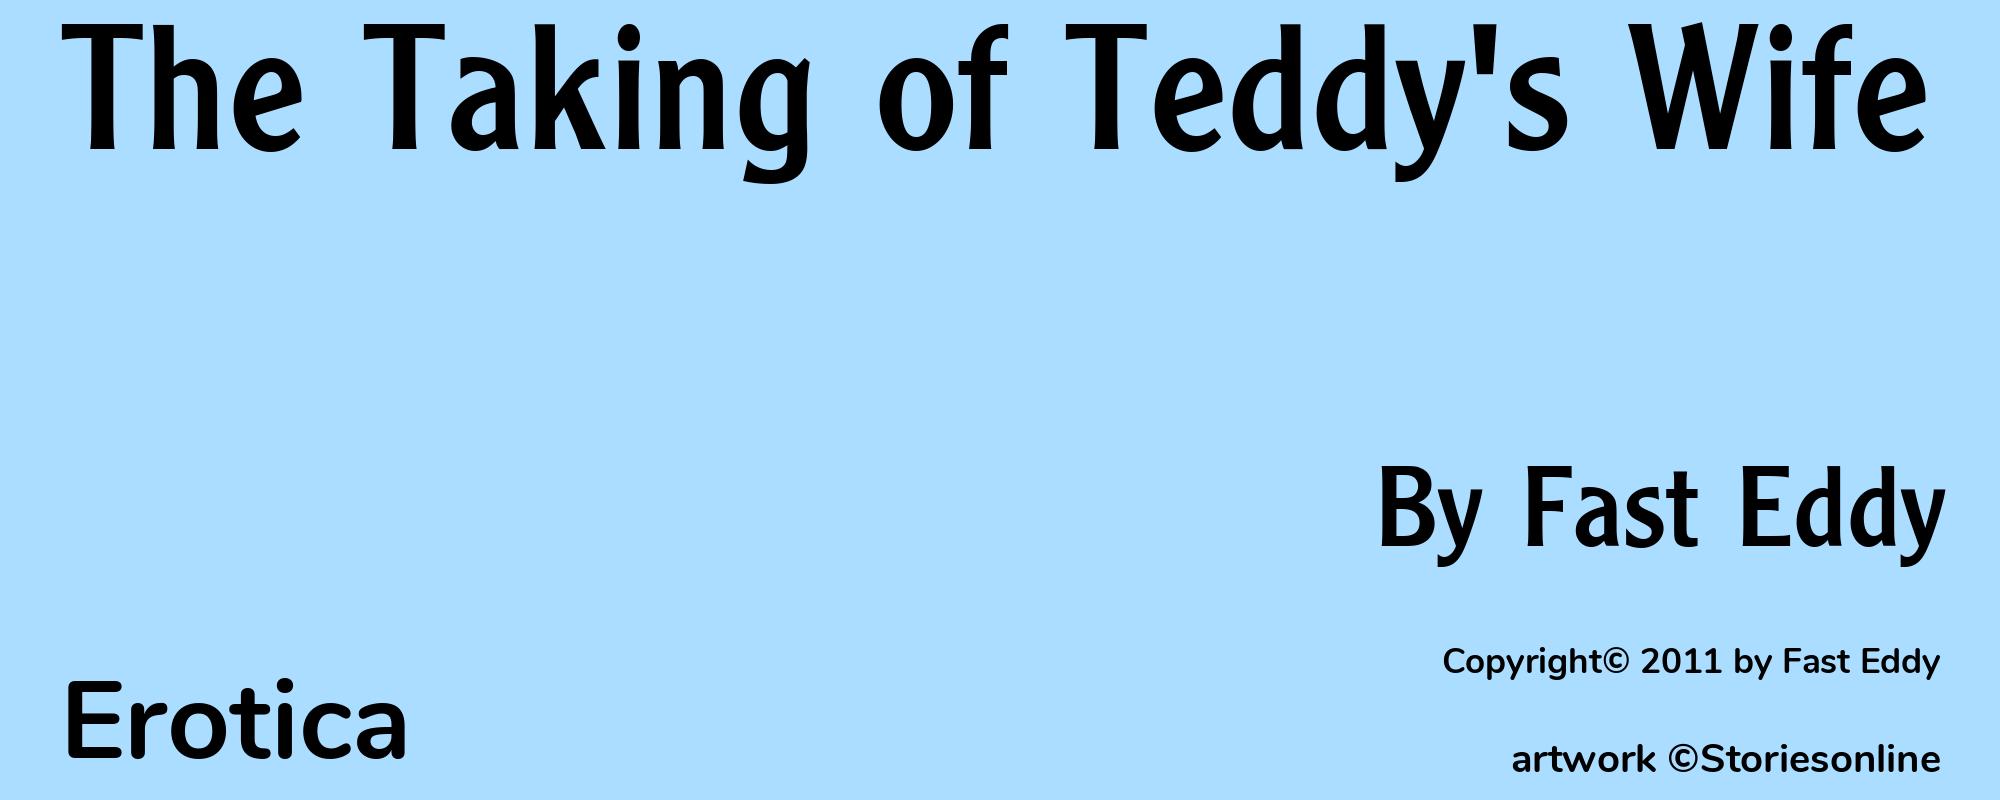 The Taking of Teddy's Wife - Cover